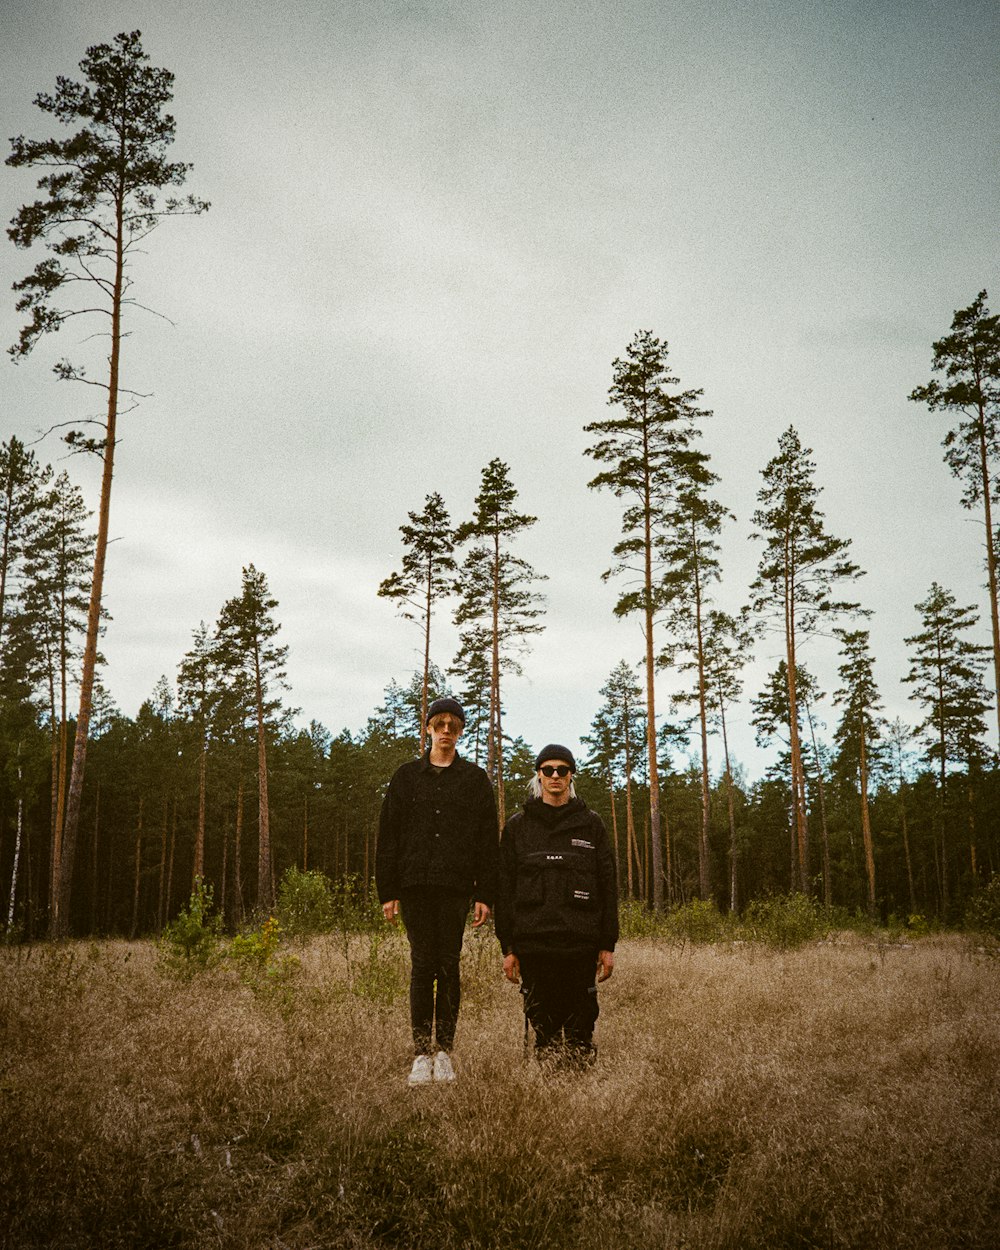 two people standing in a field with trees in the background